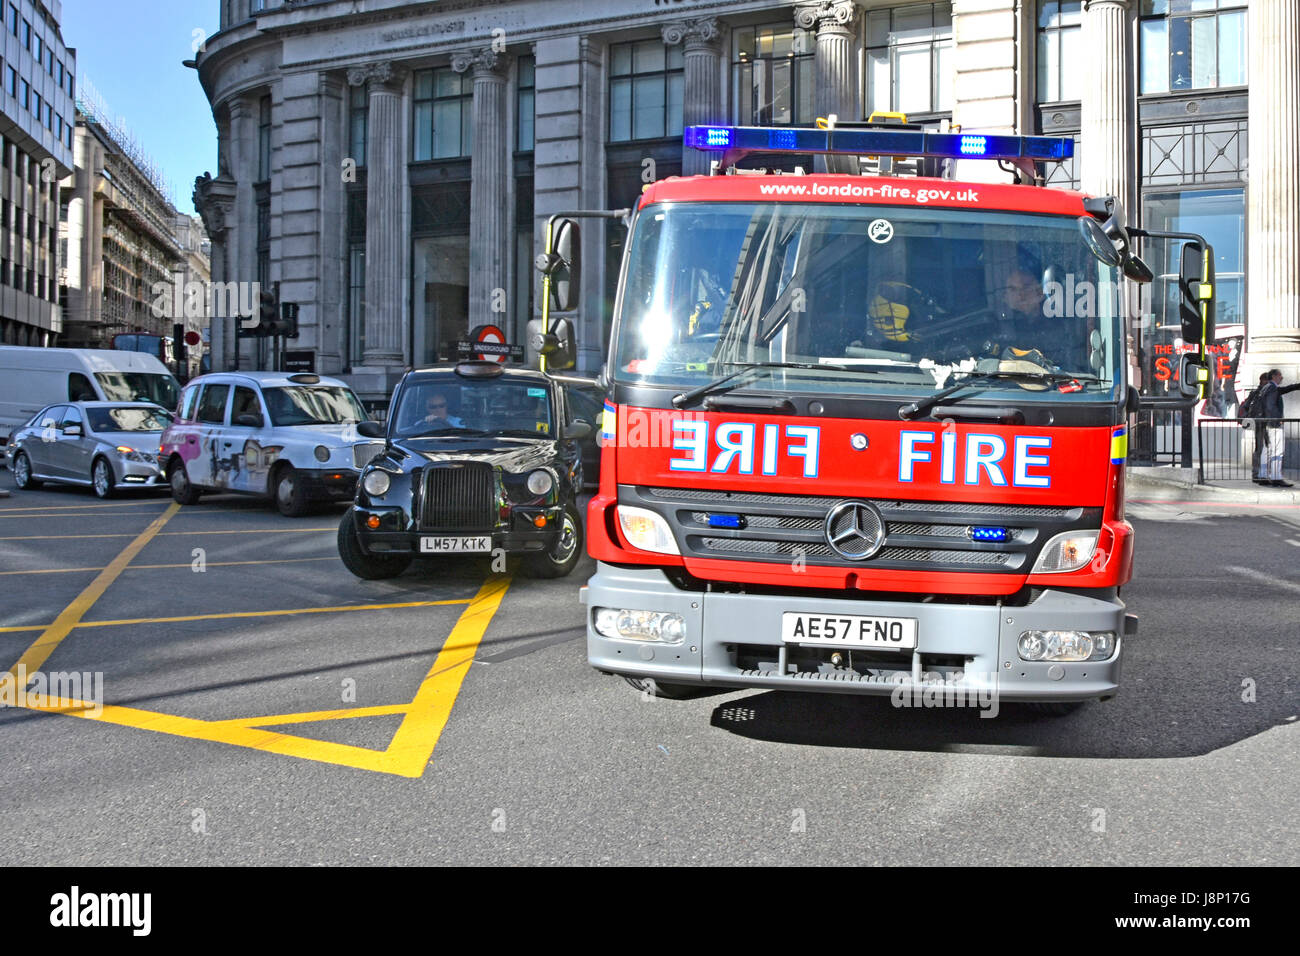 Close up Fire engine emergency services response City of London UK Fire brigade Mercedes Benz appliance 999 call passing London taxi at box junction Stock Photo